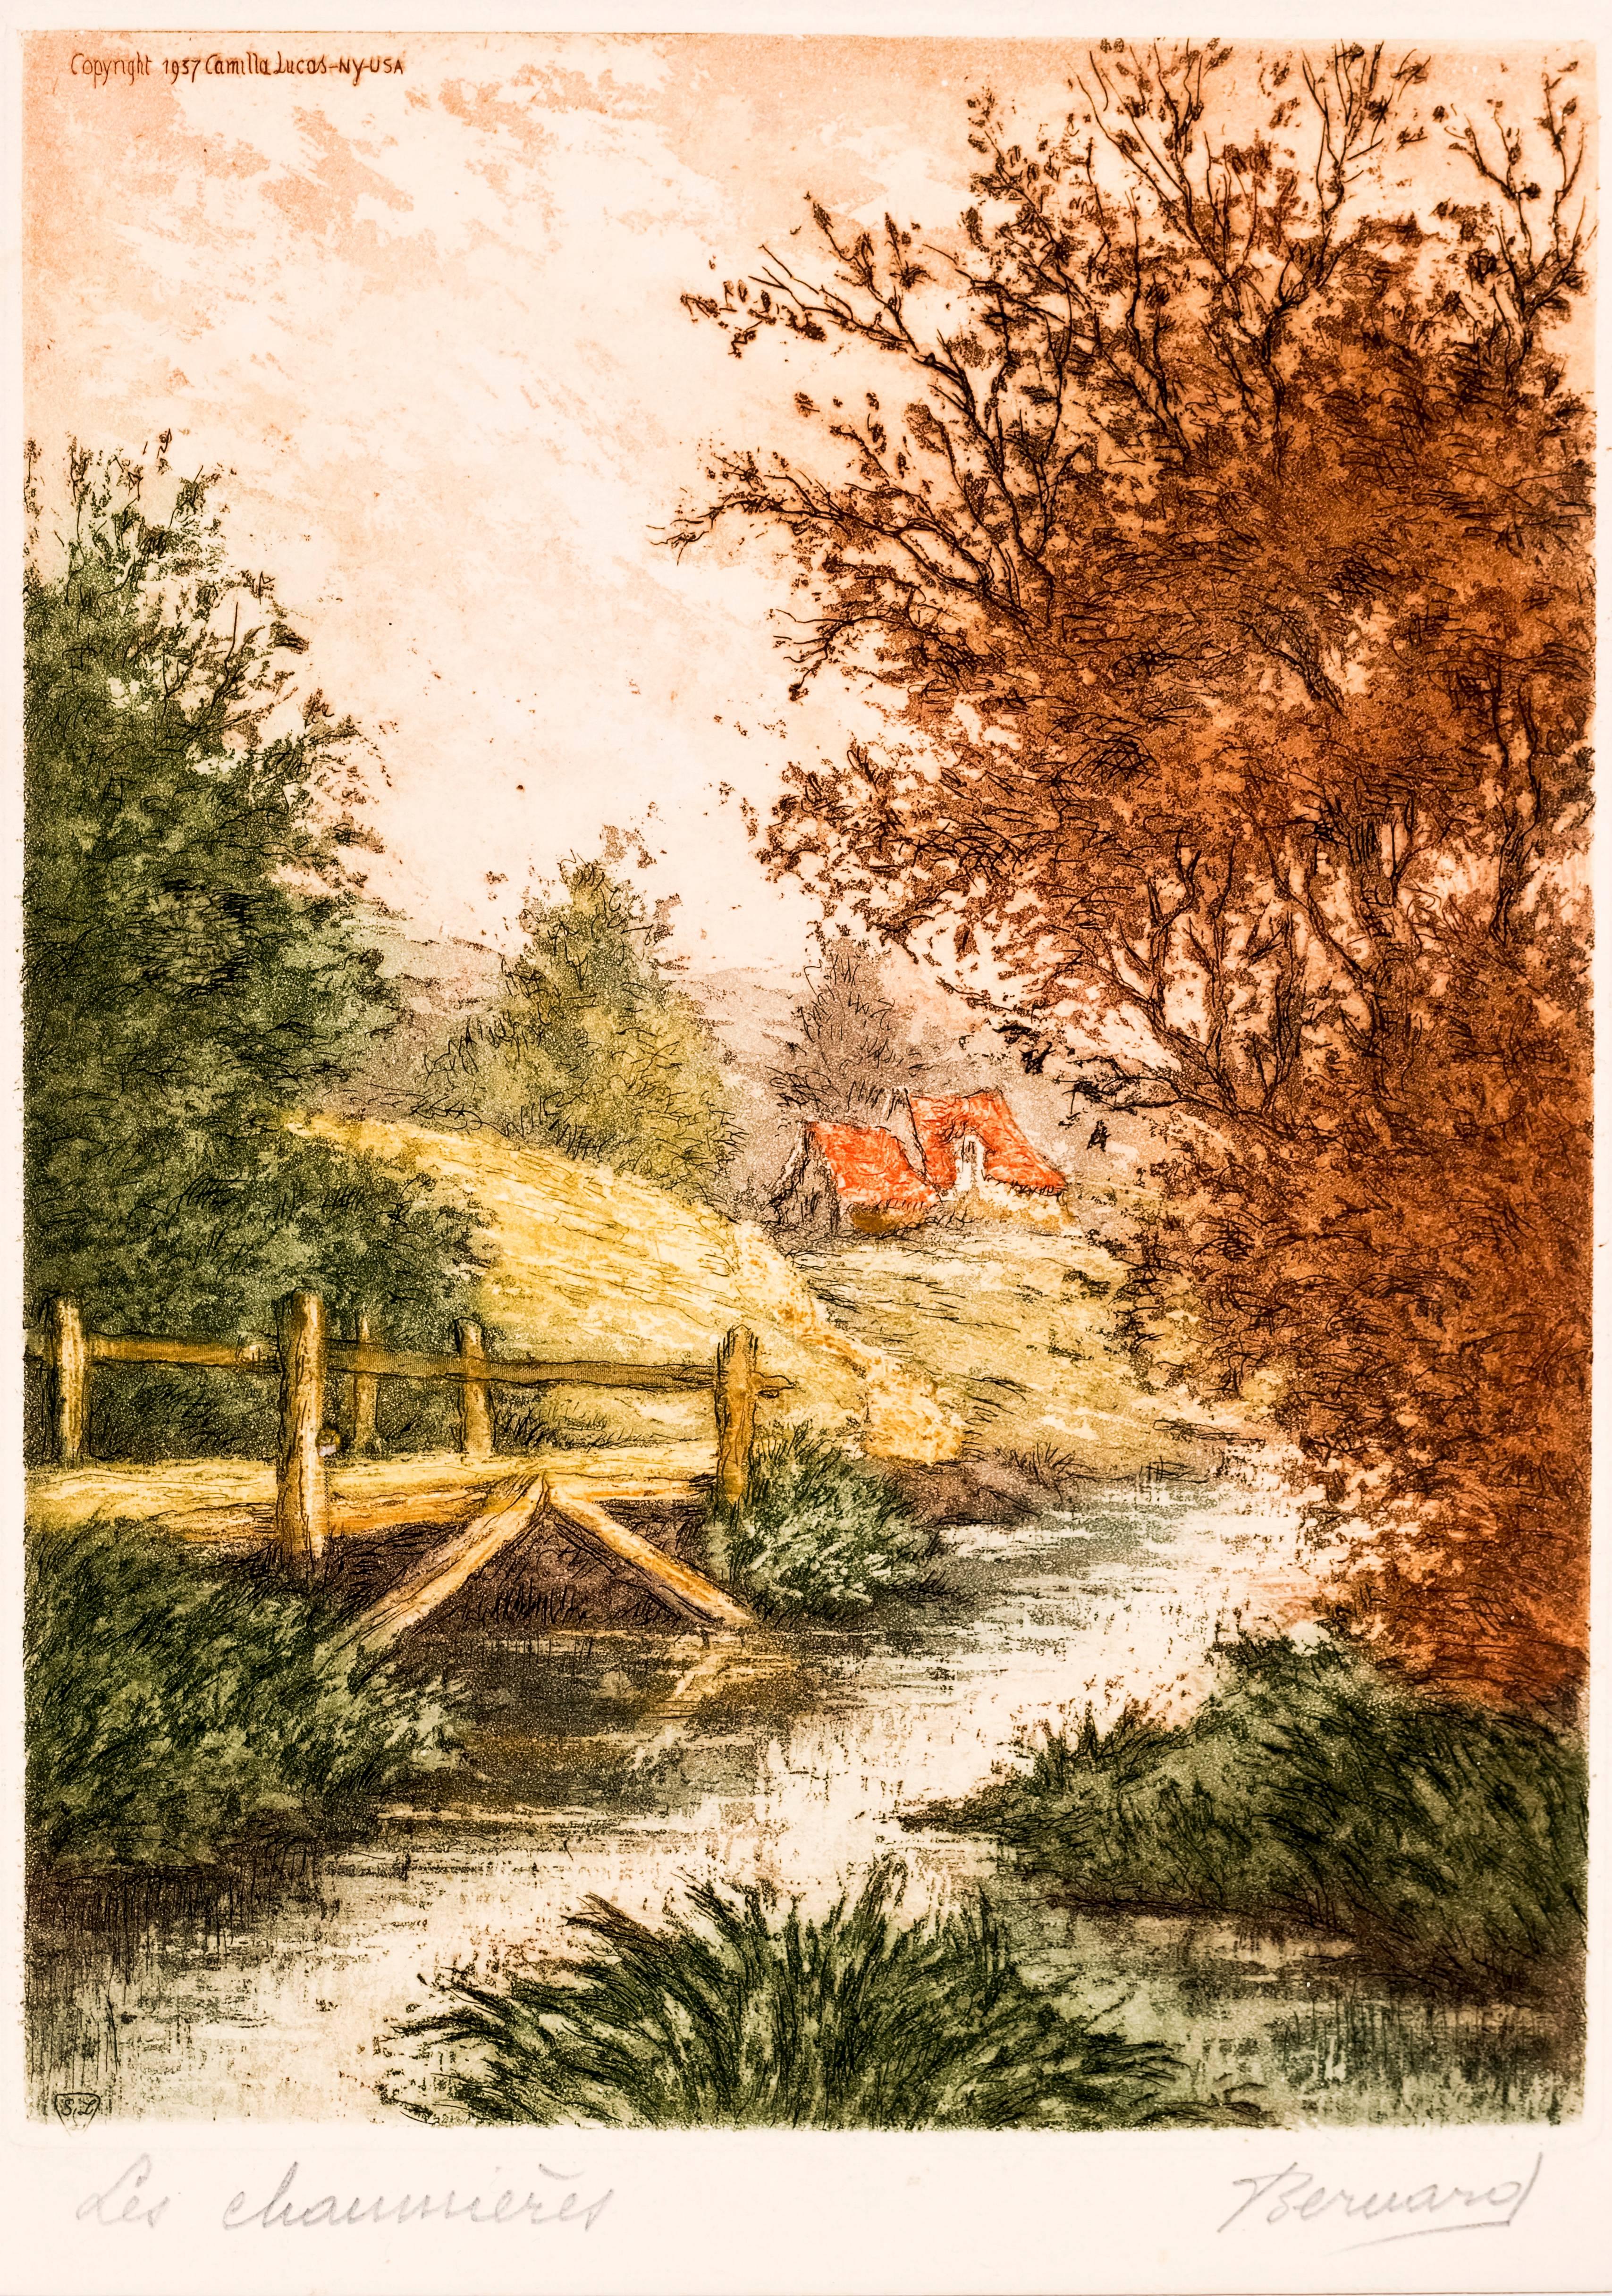 Two Charming Thatched Cottages - Print by Beruard